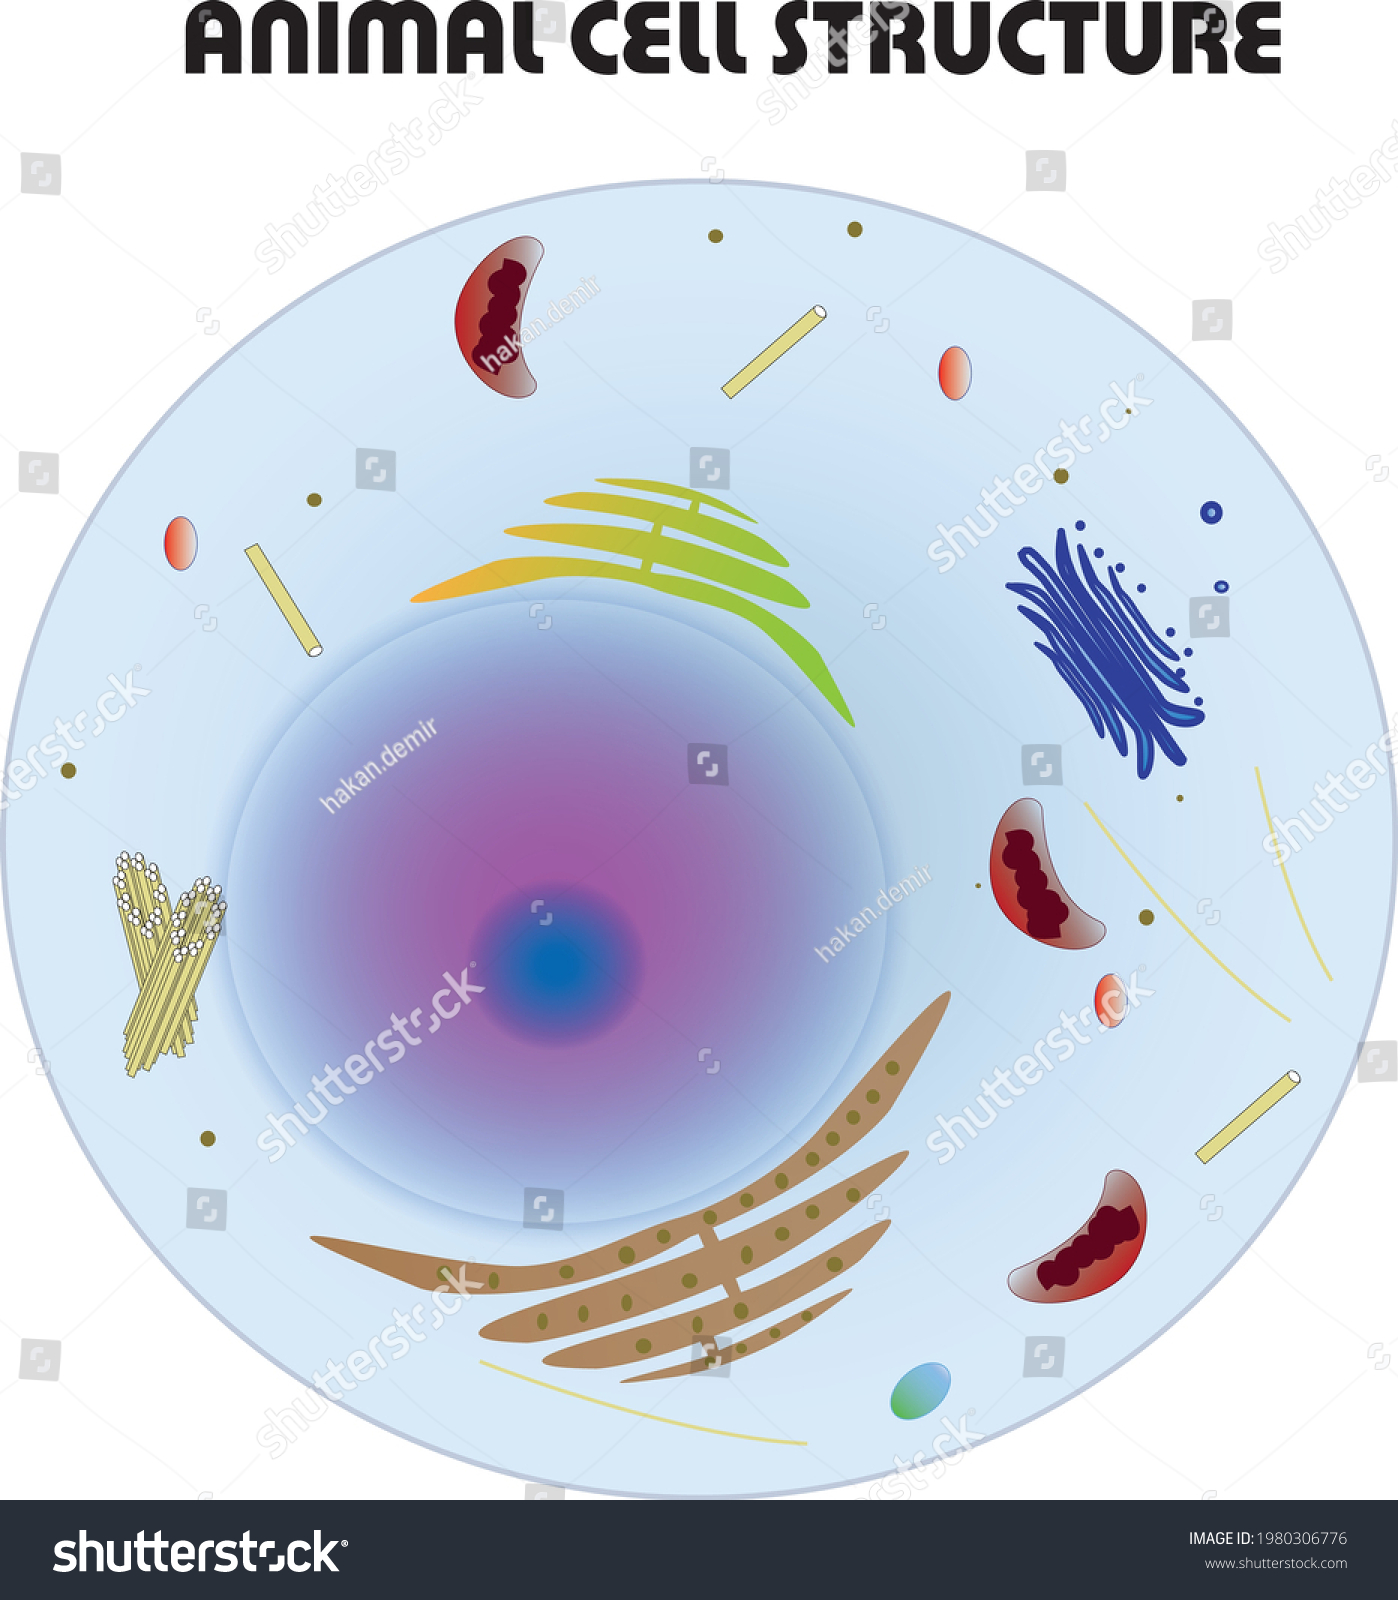 Animal Cell Structure Organelles Without Label Stock Vector Royalty Free 1980306776